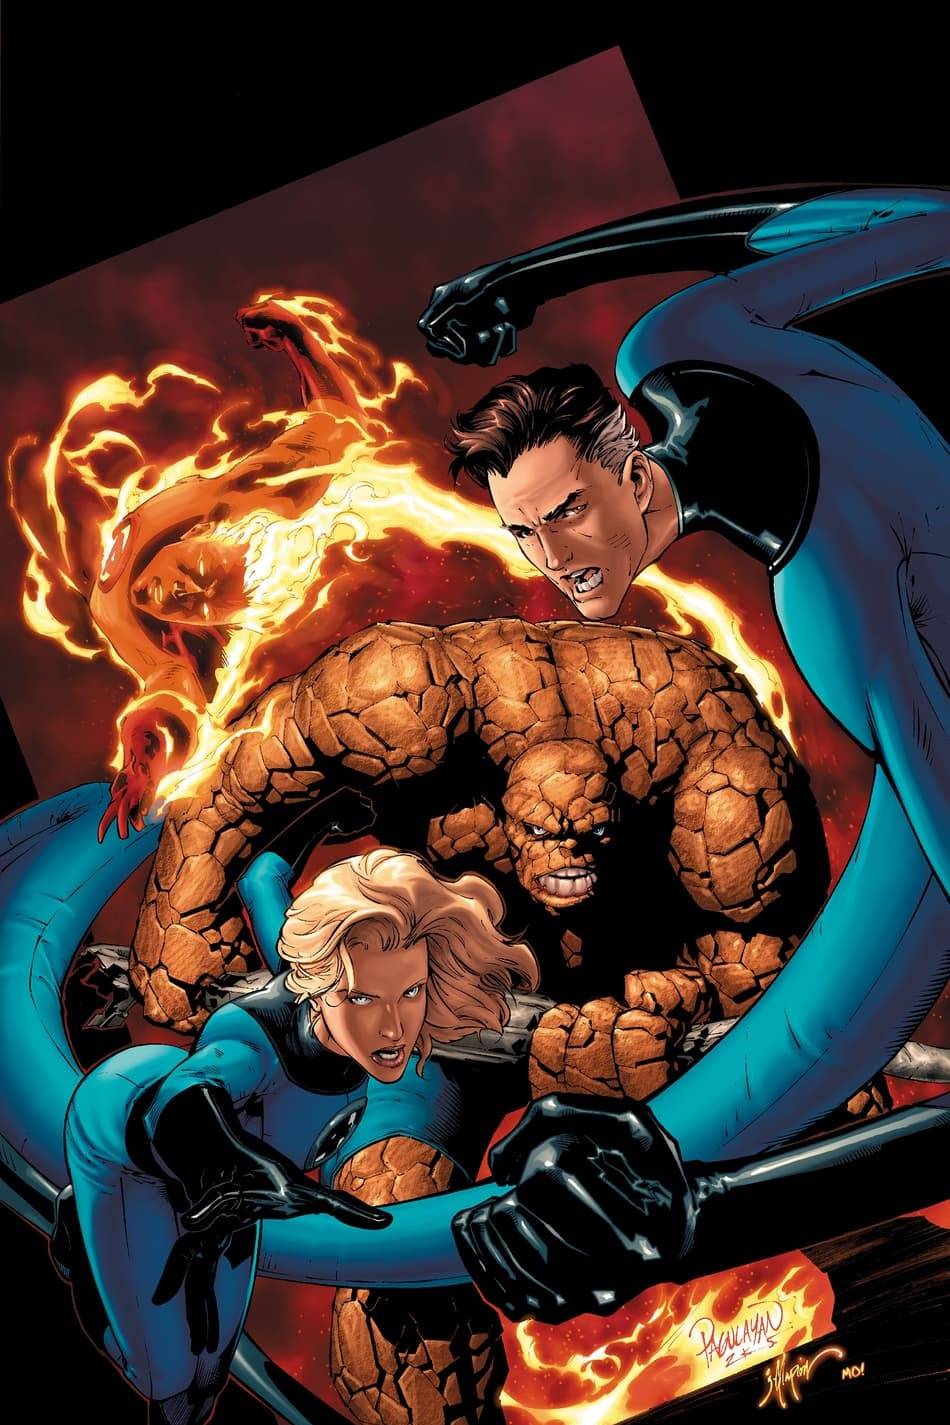 Rumored Fantastic Four Cast Member Gives Intriguing Response To Casting Speculation